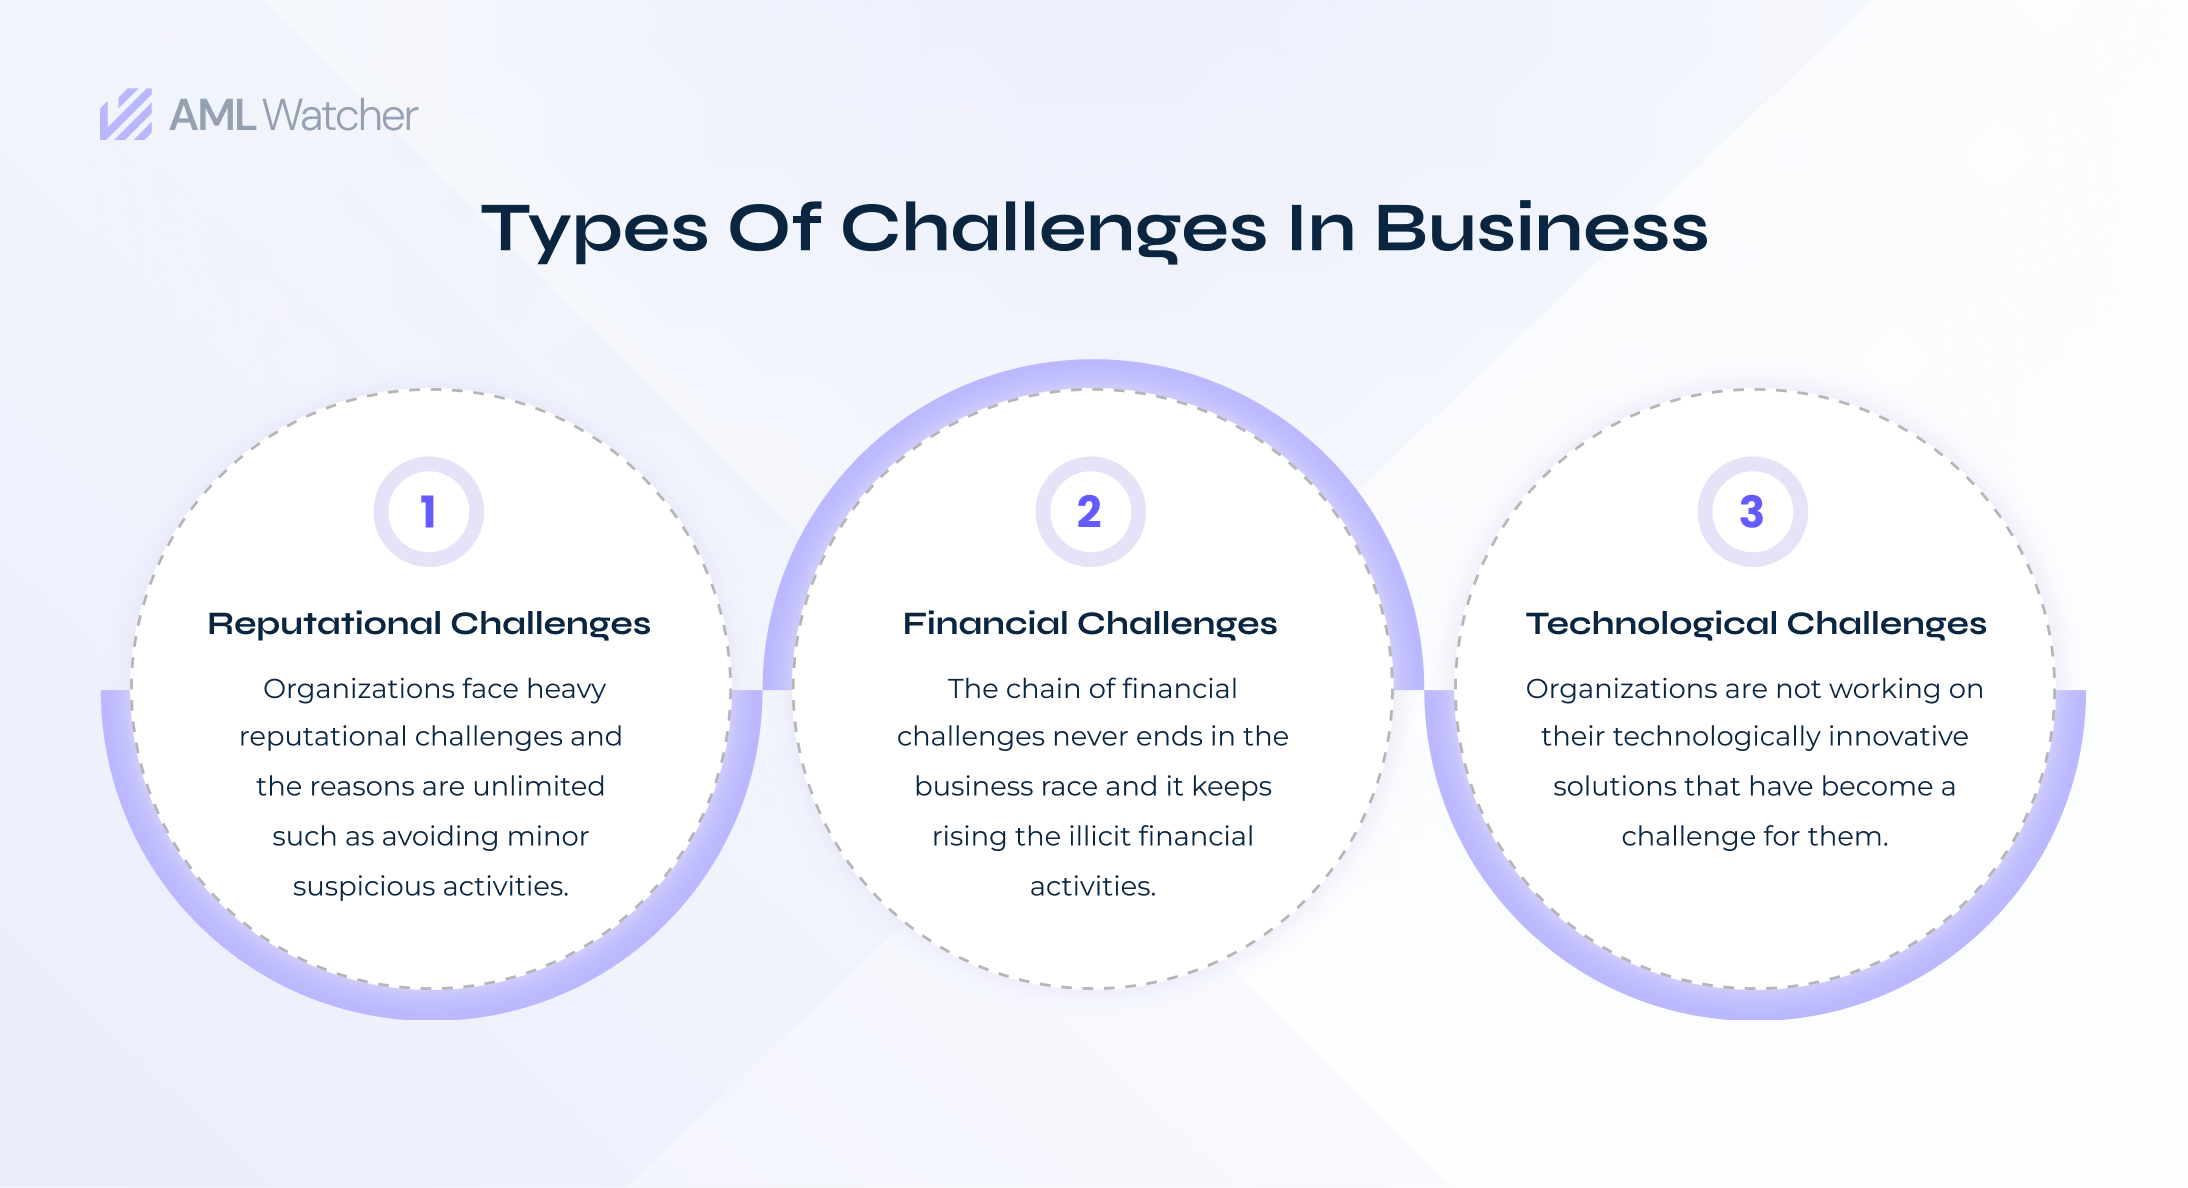 The challenges in the business race are associated with every phase of business success.